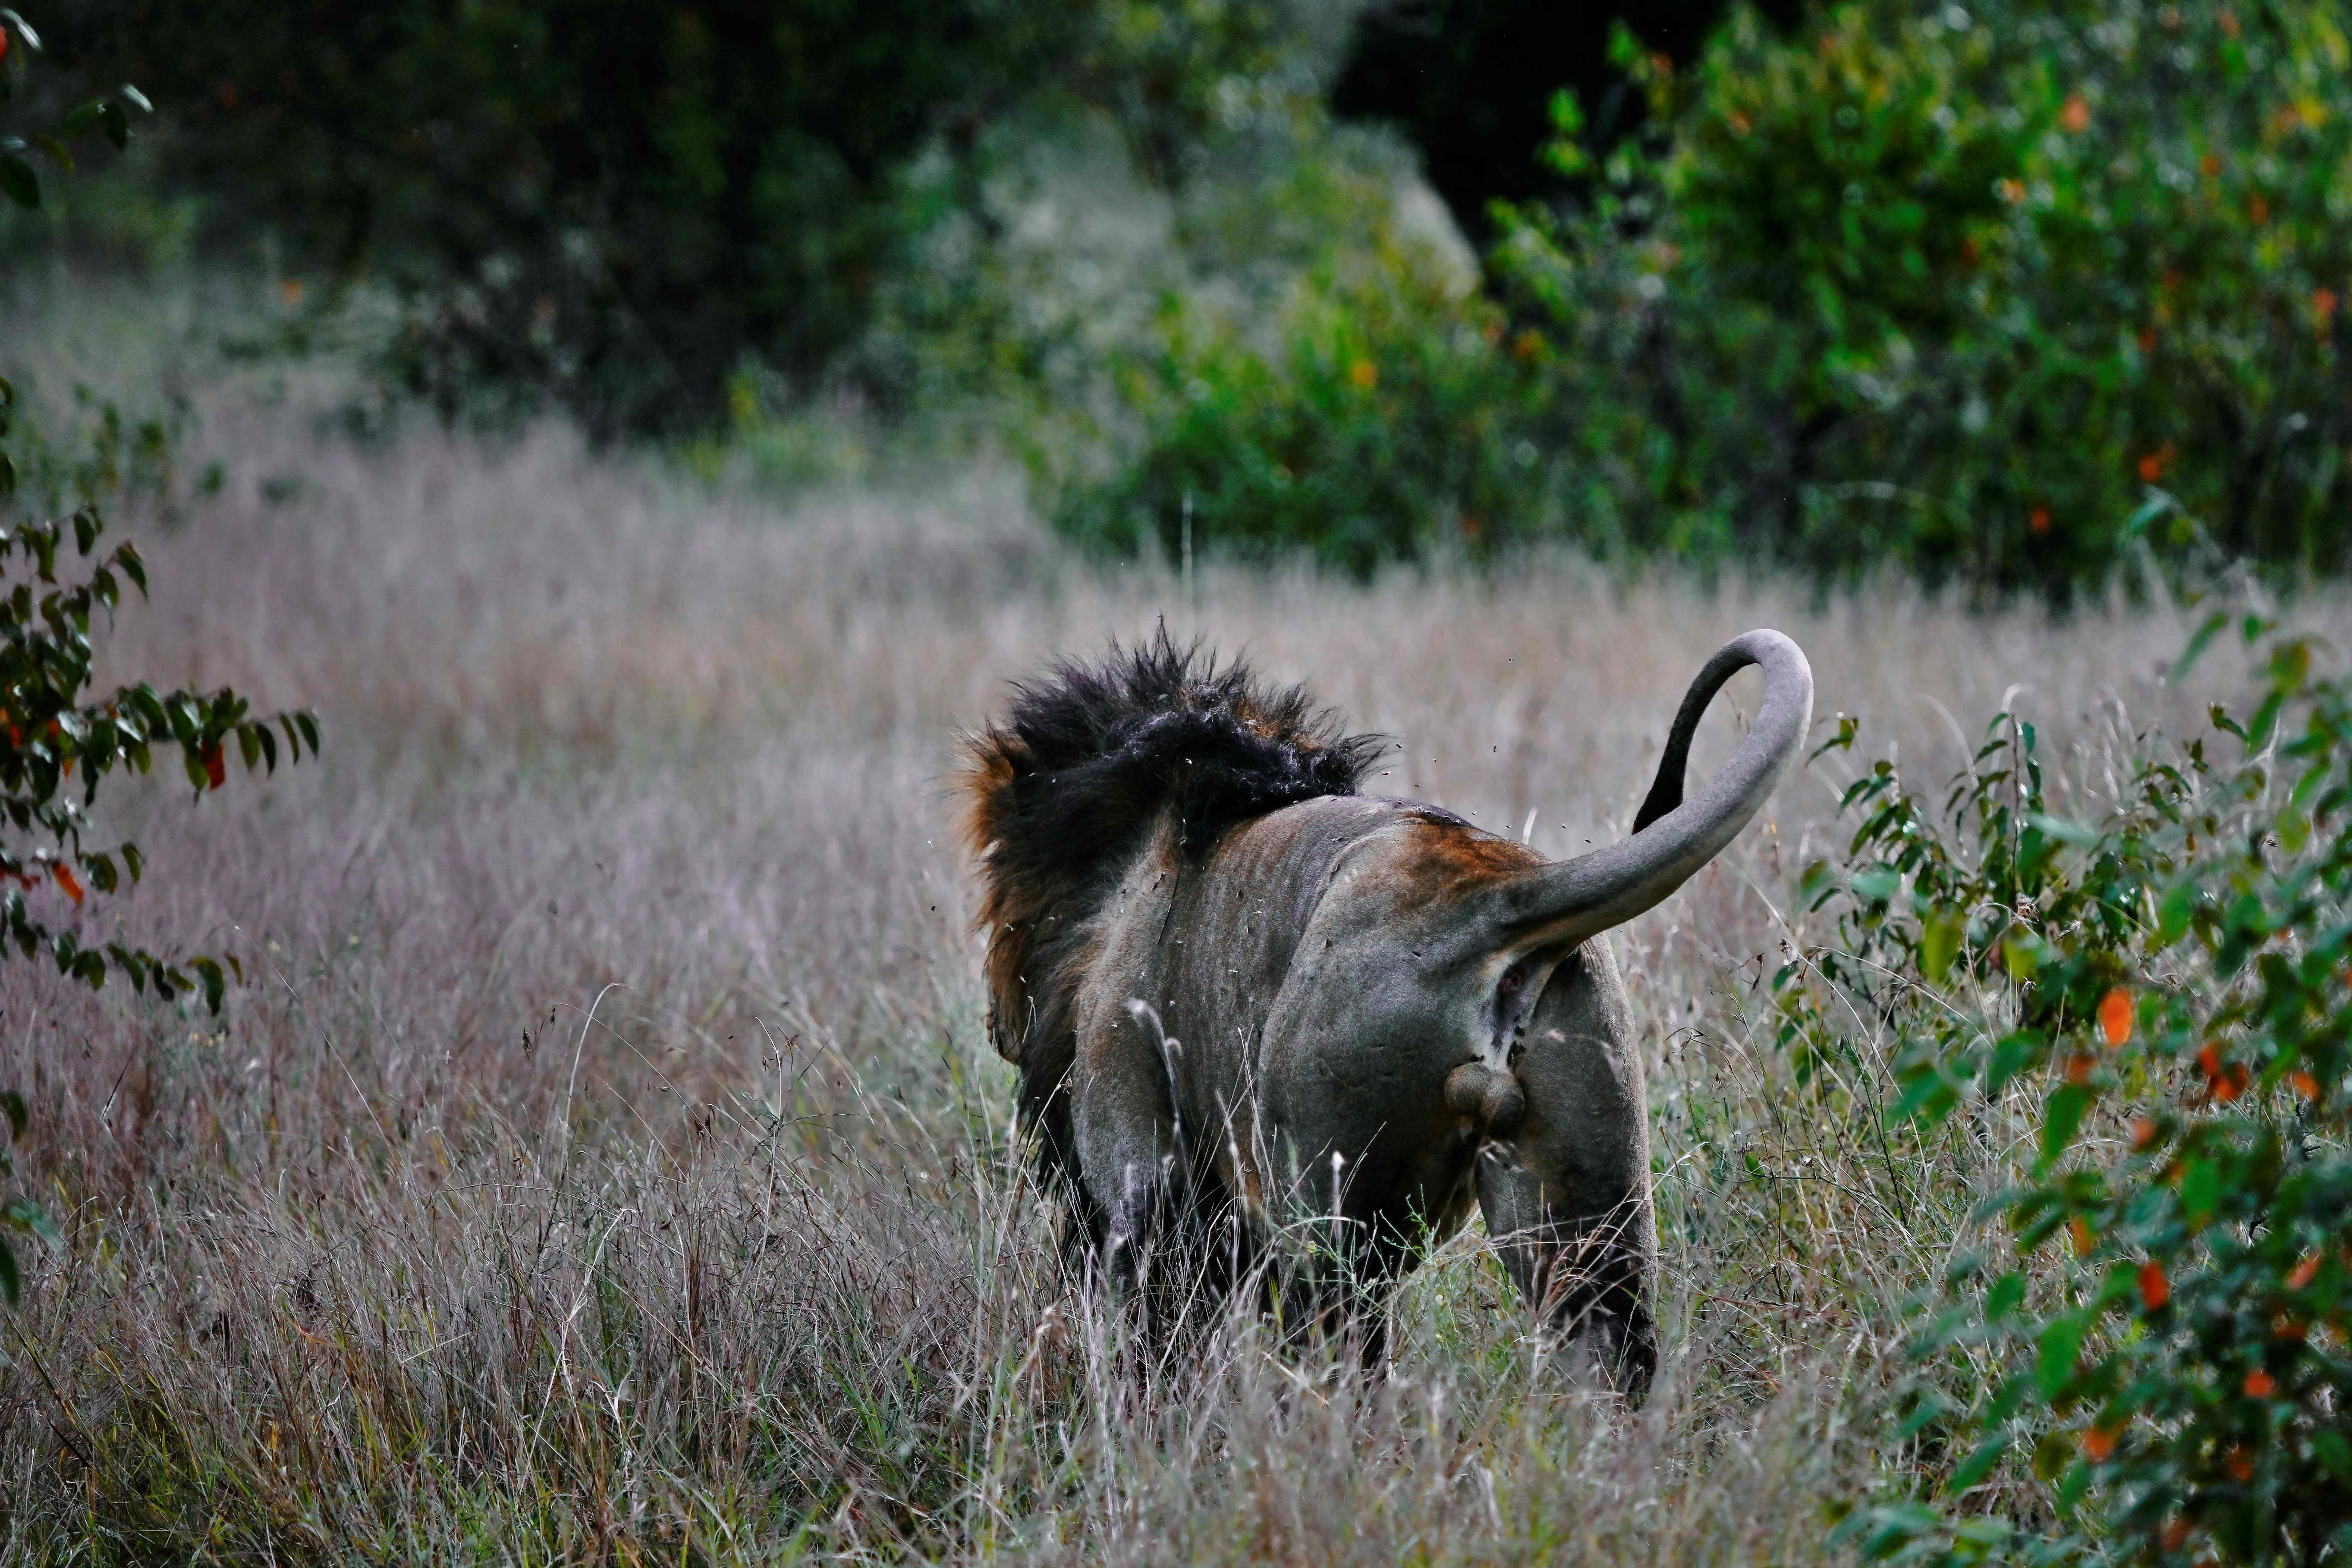 Lion attacks on people and cattle are not uncommon in Tanzania